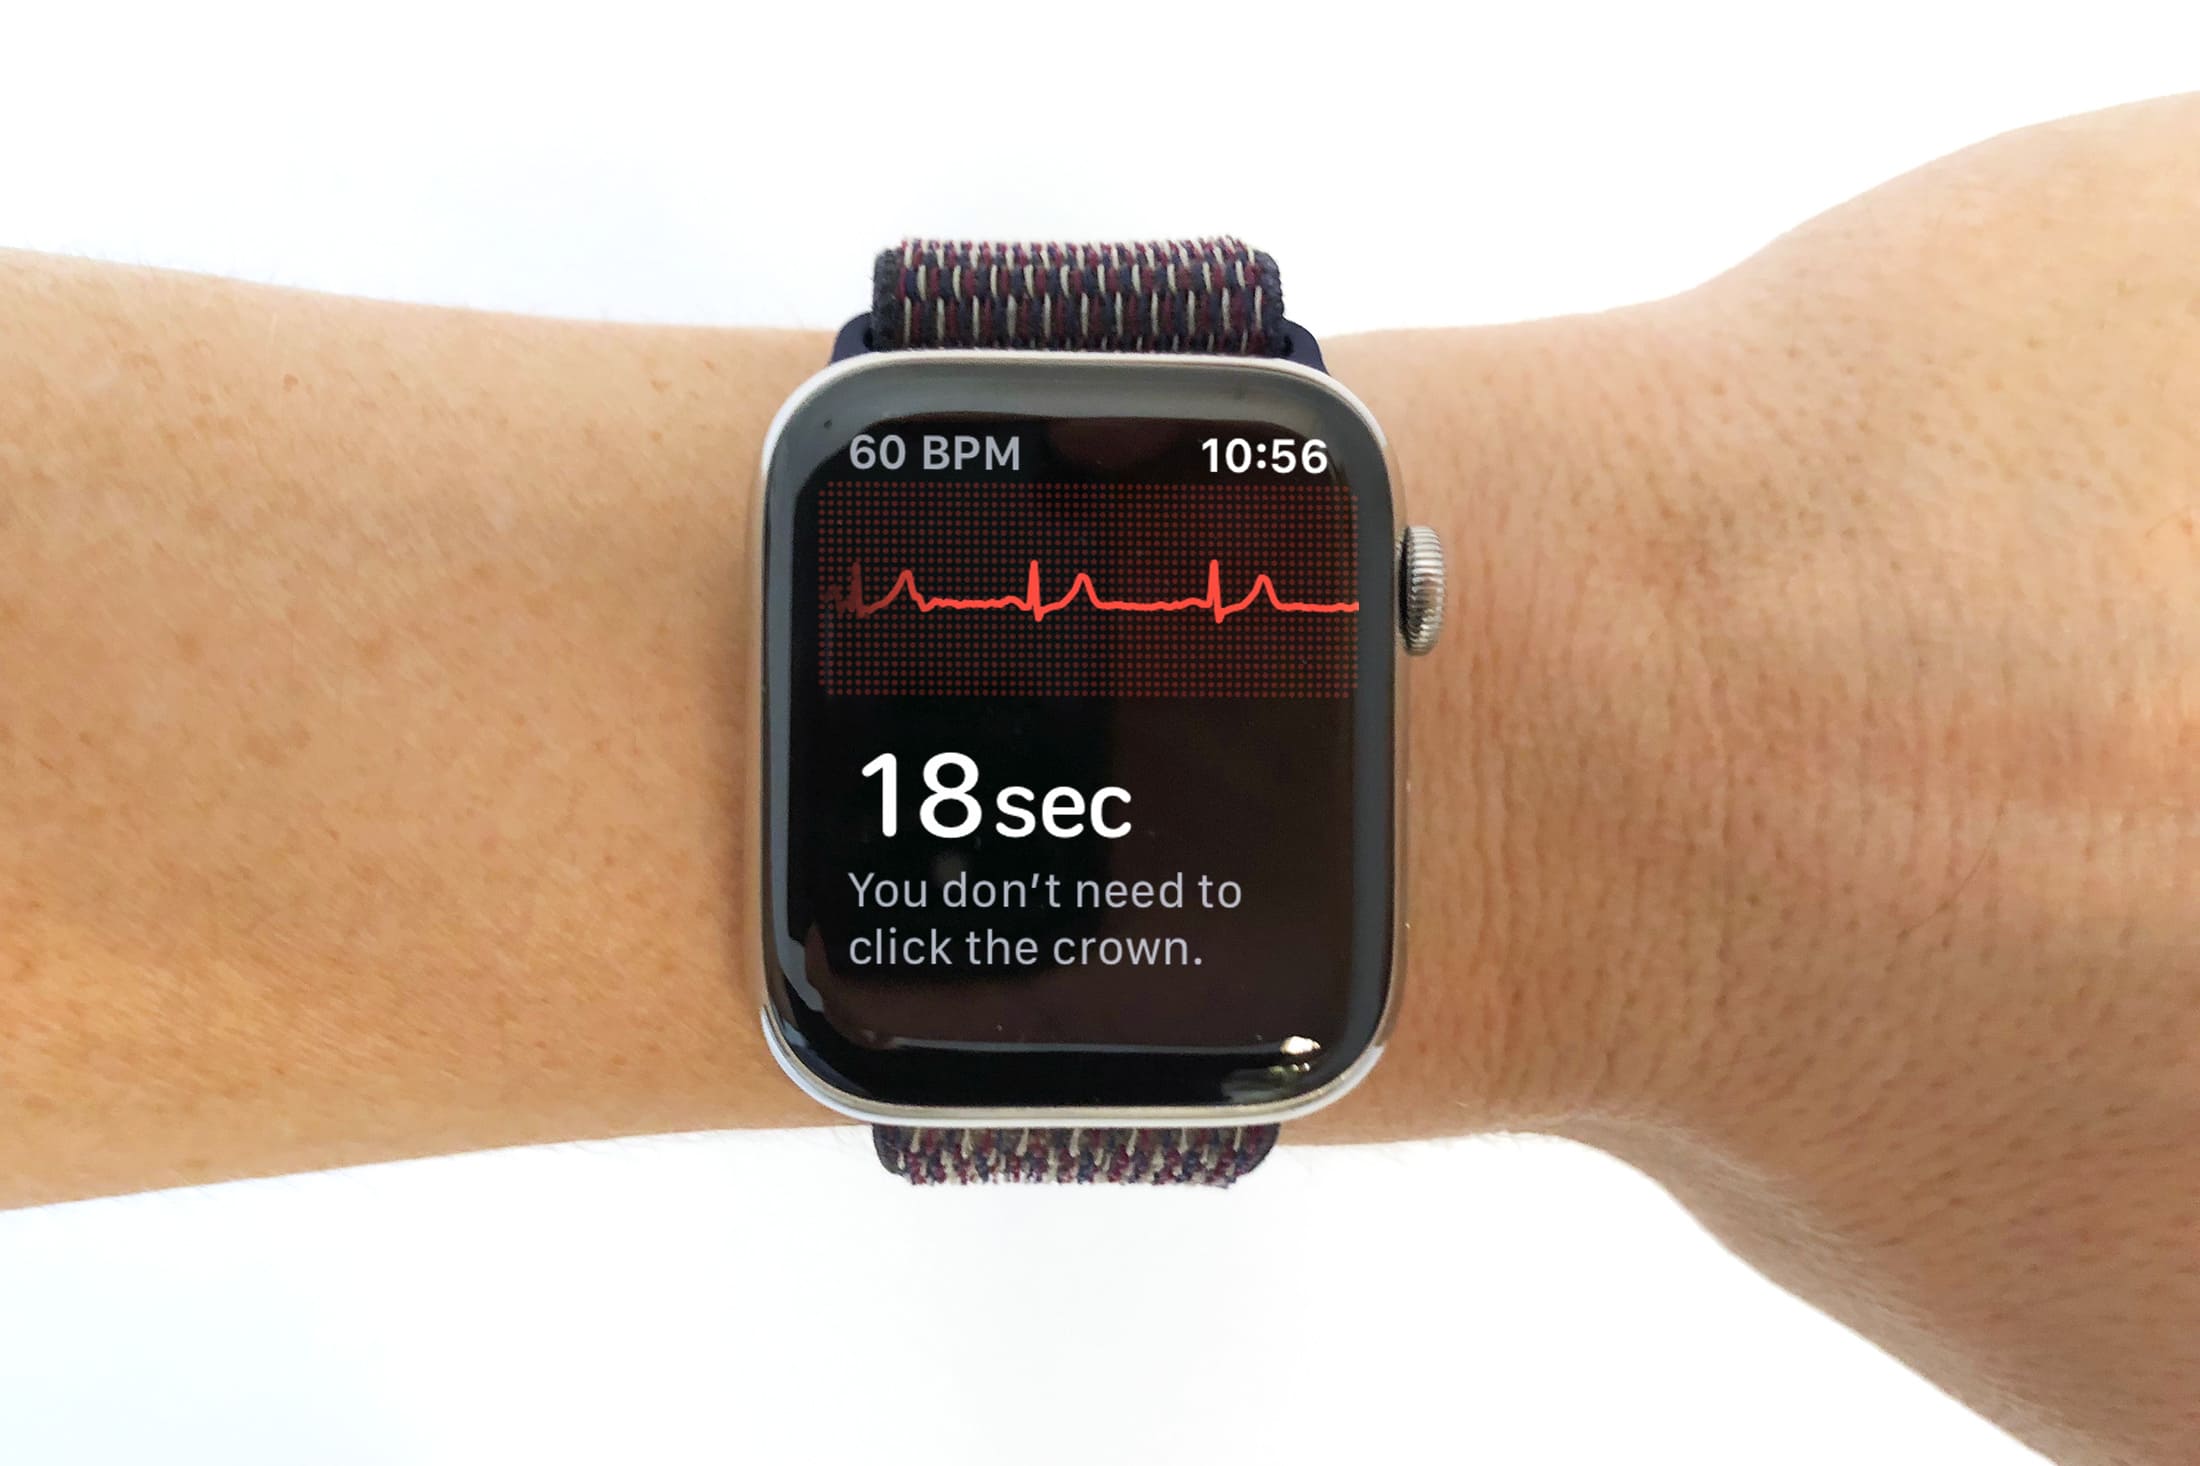 Apple Watch may have saved the life of a 79-year-old with heart condition